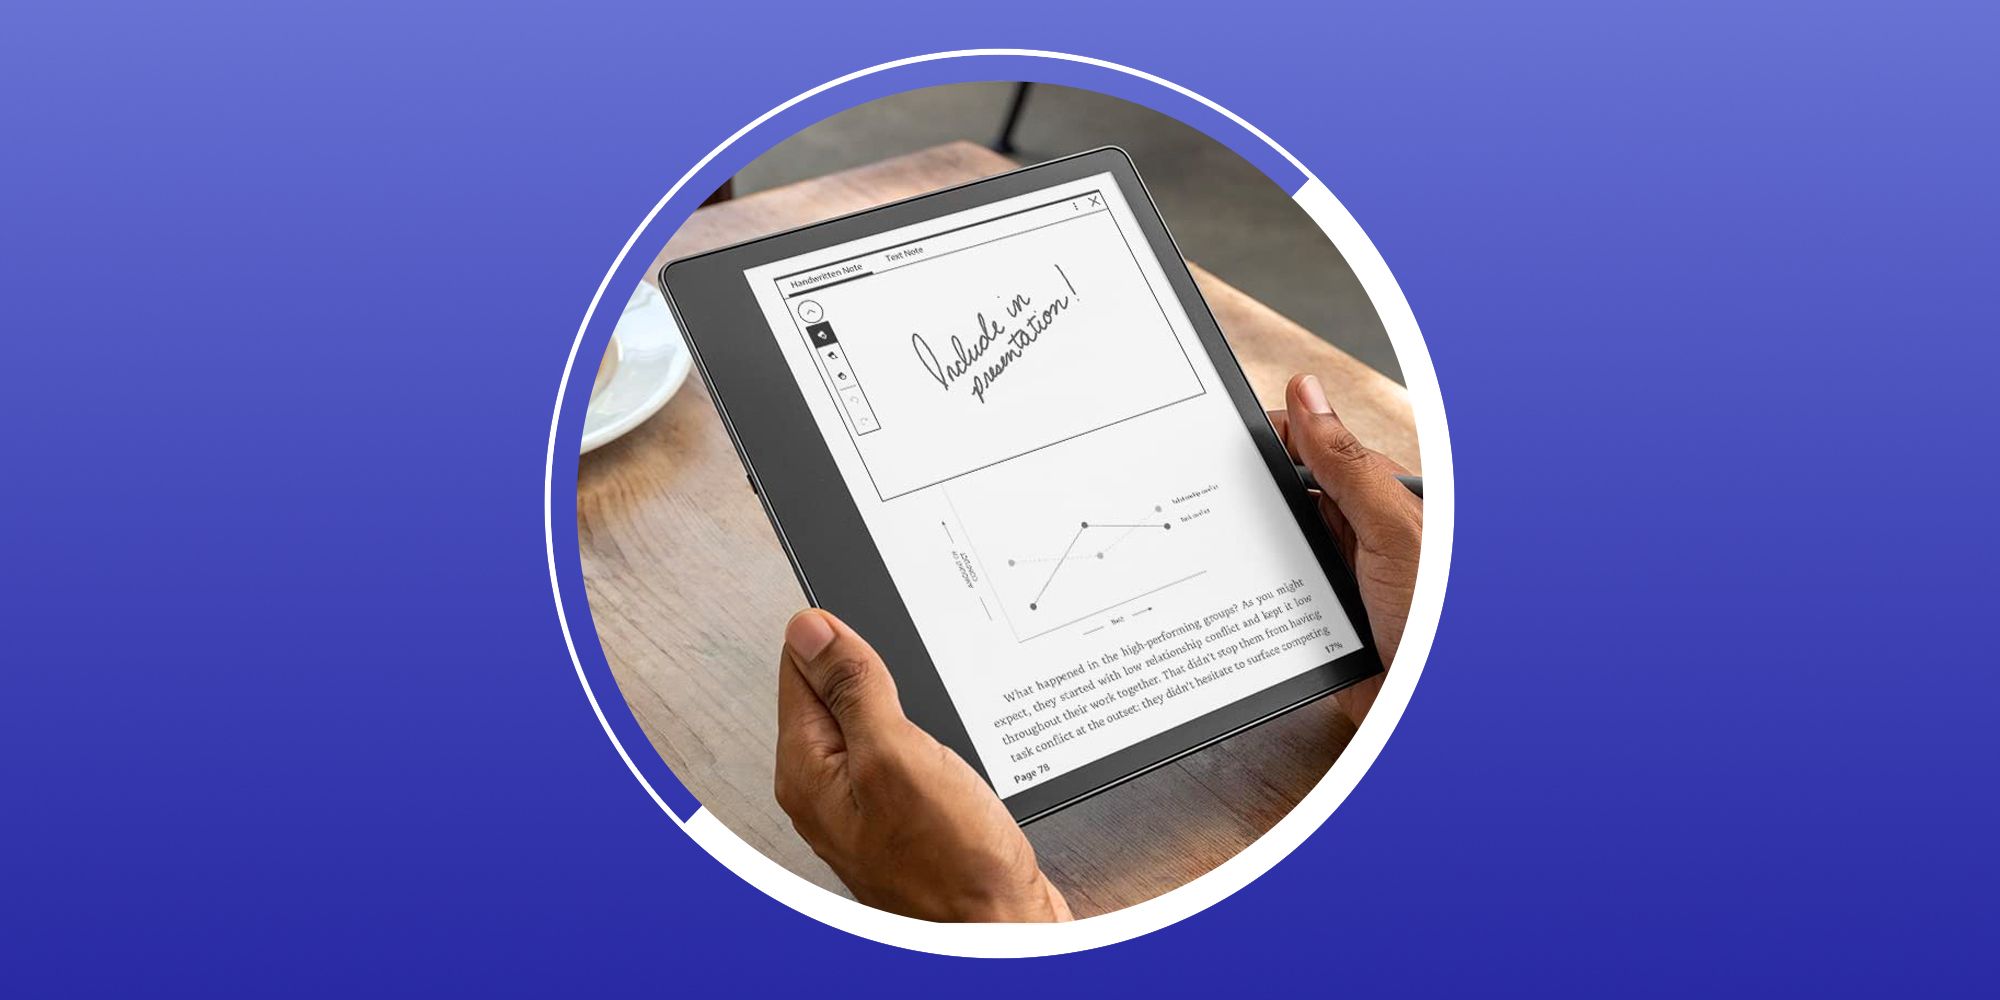 Sony revamps its Digital Paper tablet with new screen and